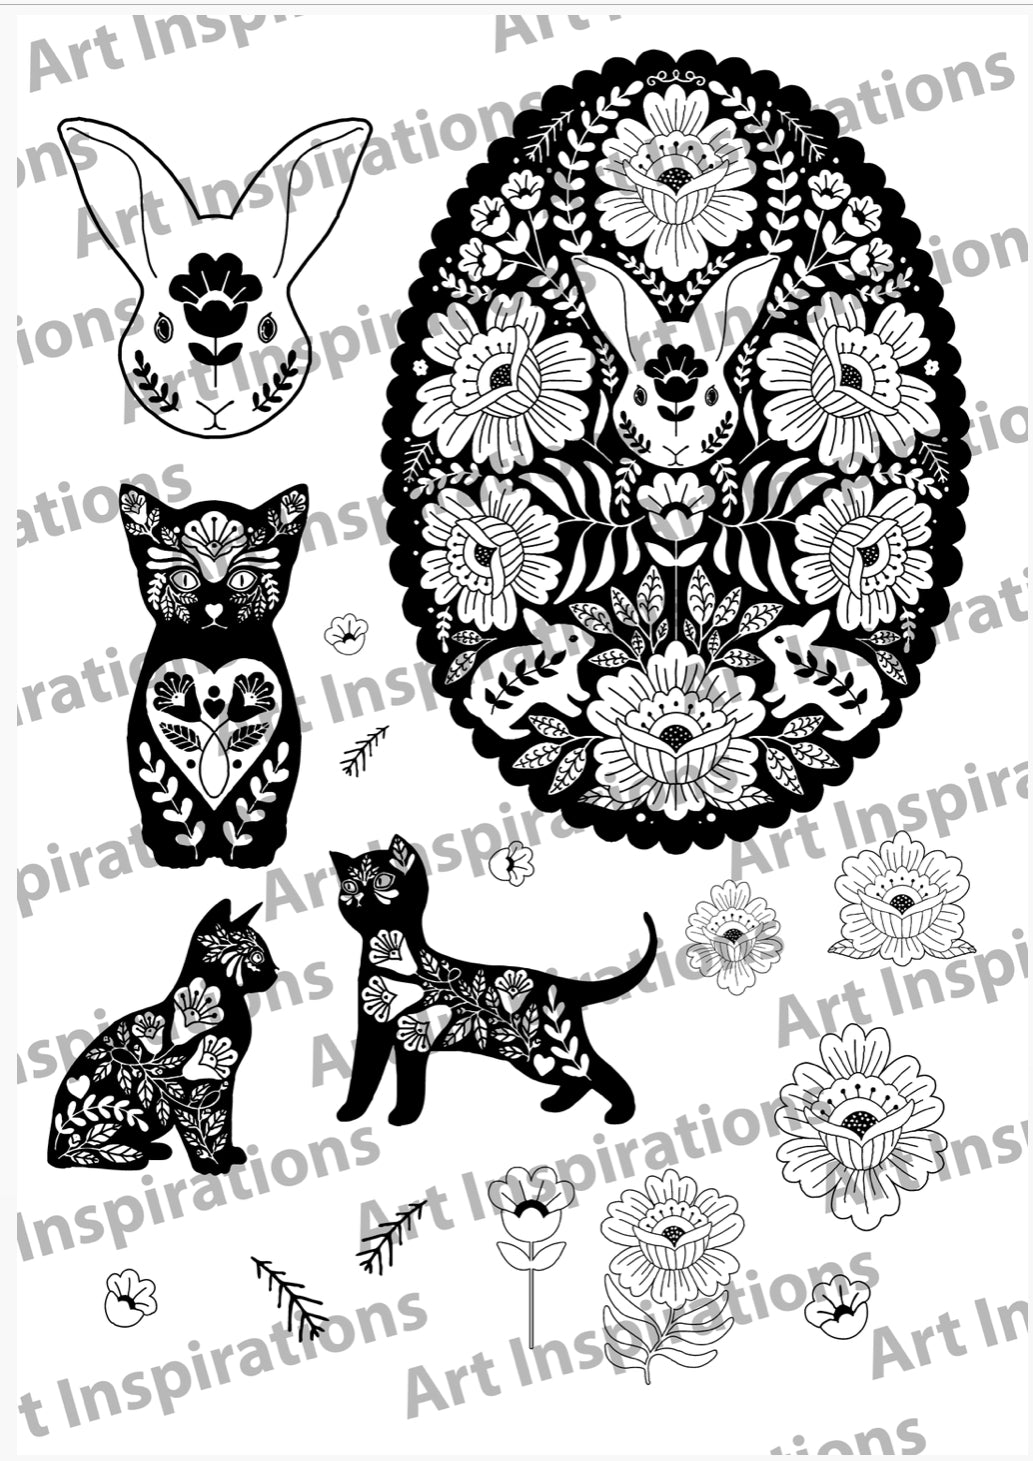 Art Inspirations by Wensdi Made A5 Clear Stamp Sheet - Lucky Rabbit and Cat - 17 Stamps